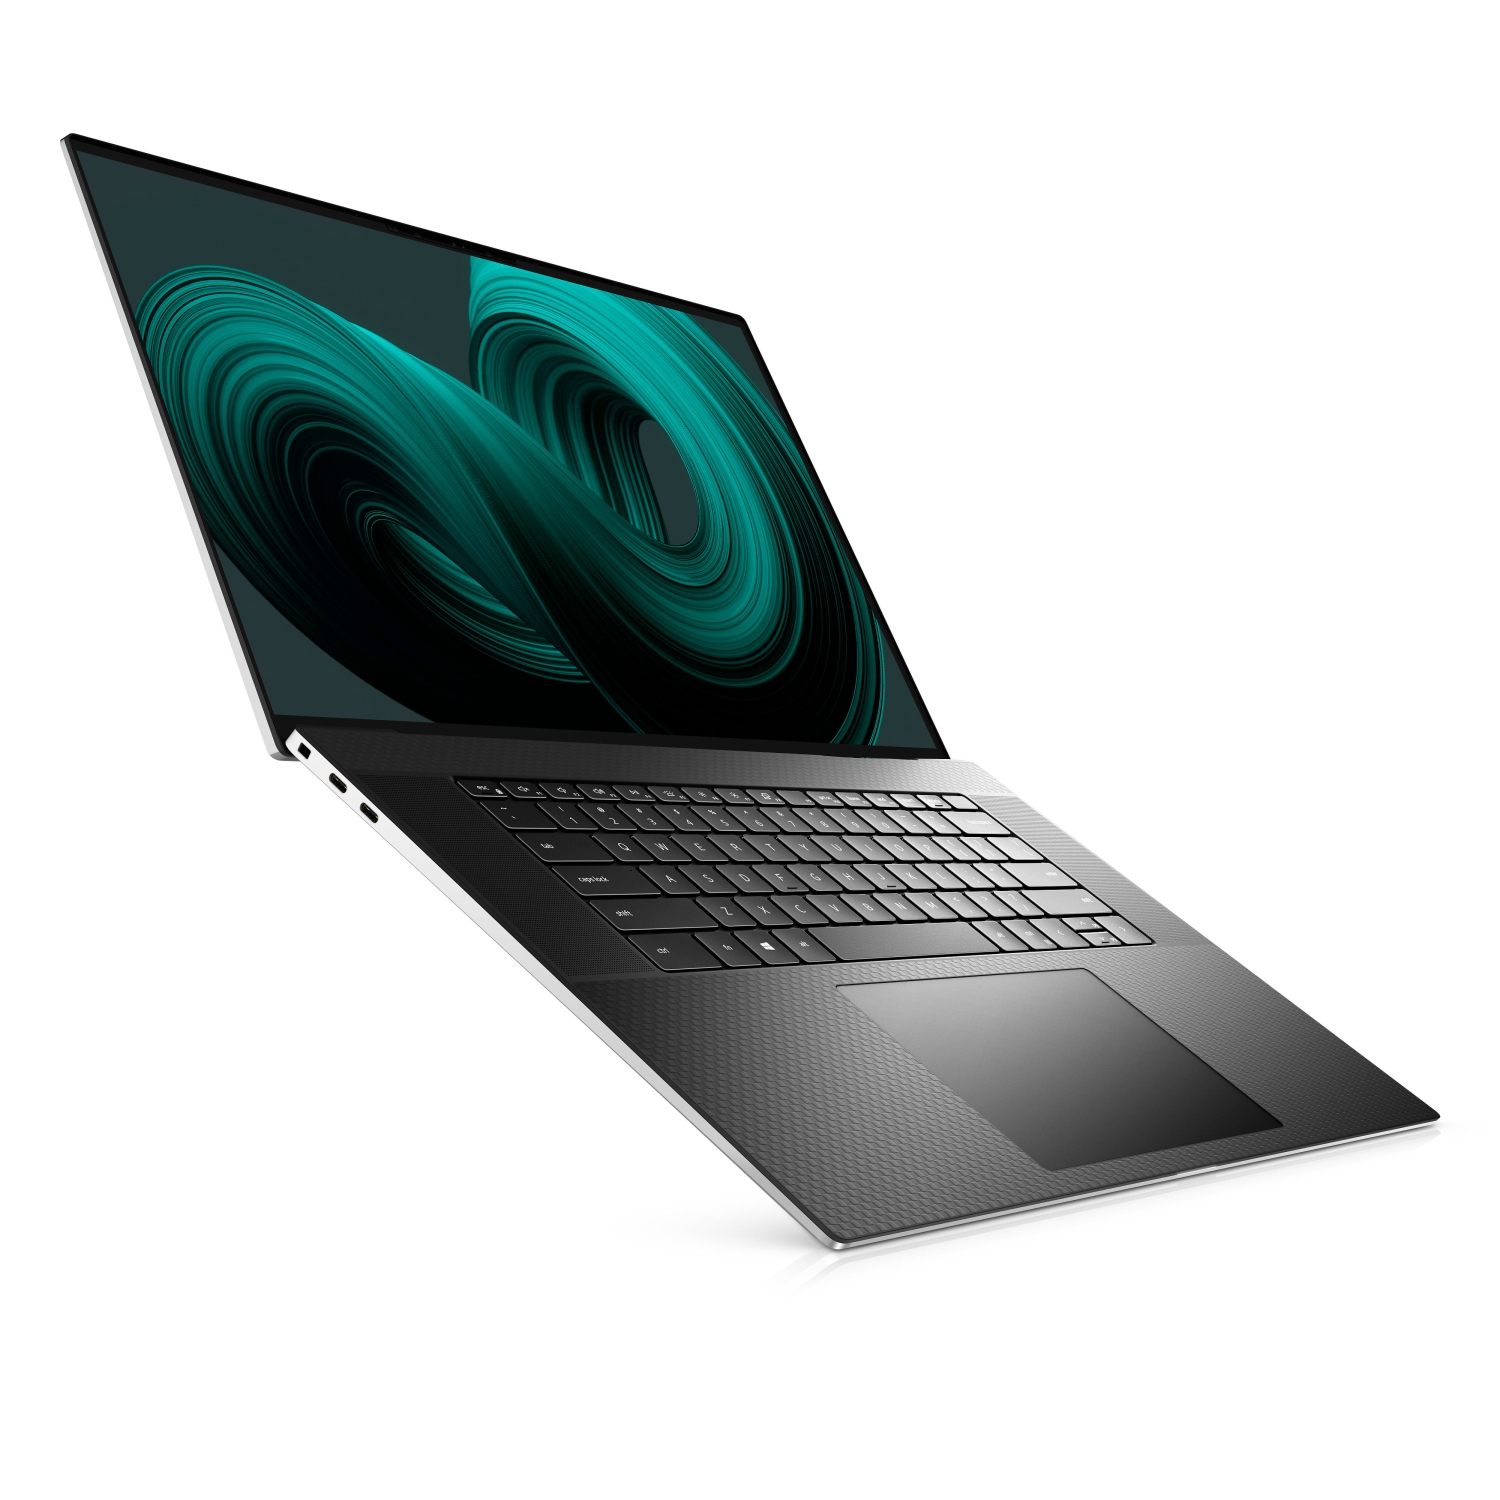 Refurbished (Excellent) - Dell XPS 17 9710 Laptop (2021), 17" 4K Touch, Core i7 - 512GB SSD - 32GB RAM - RTX 3050, 8 Cores @ 4.6 GHz - 11th Gen CPU Certified Refurbished